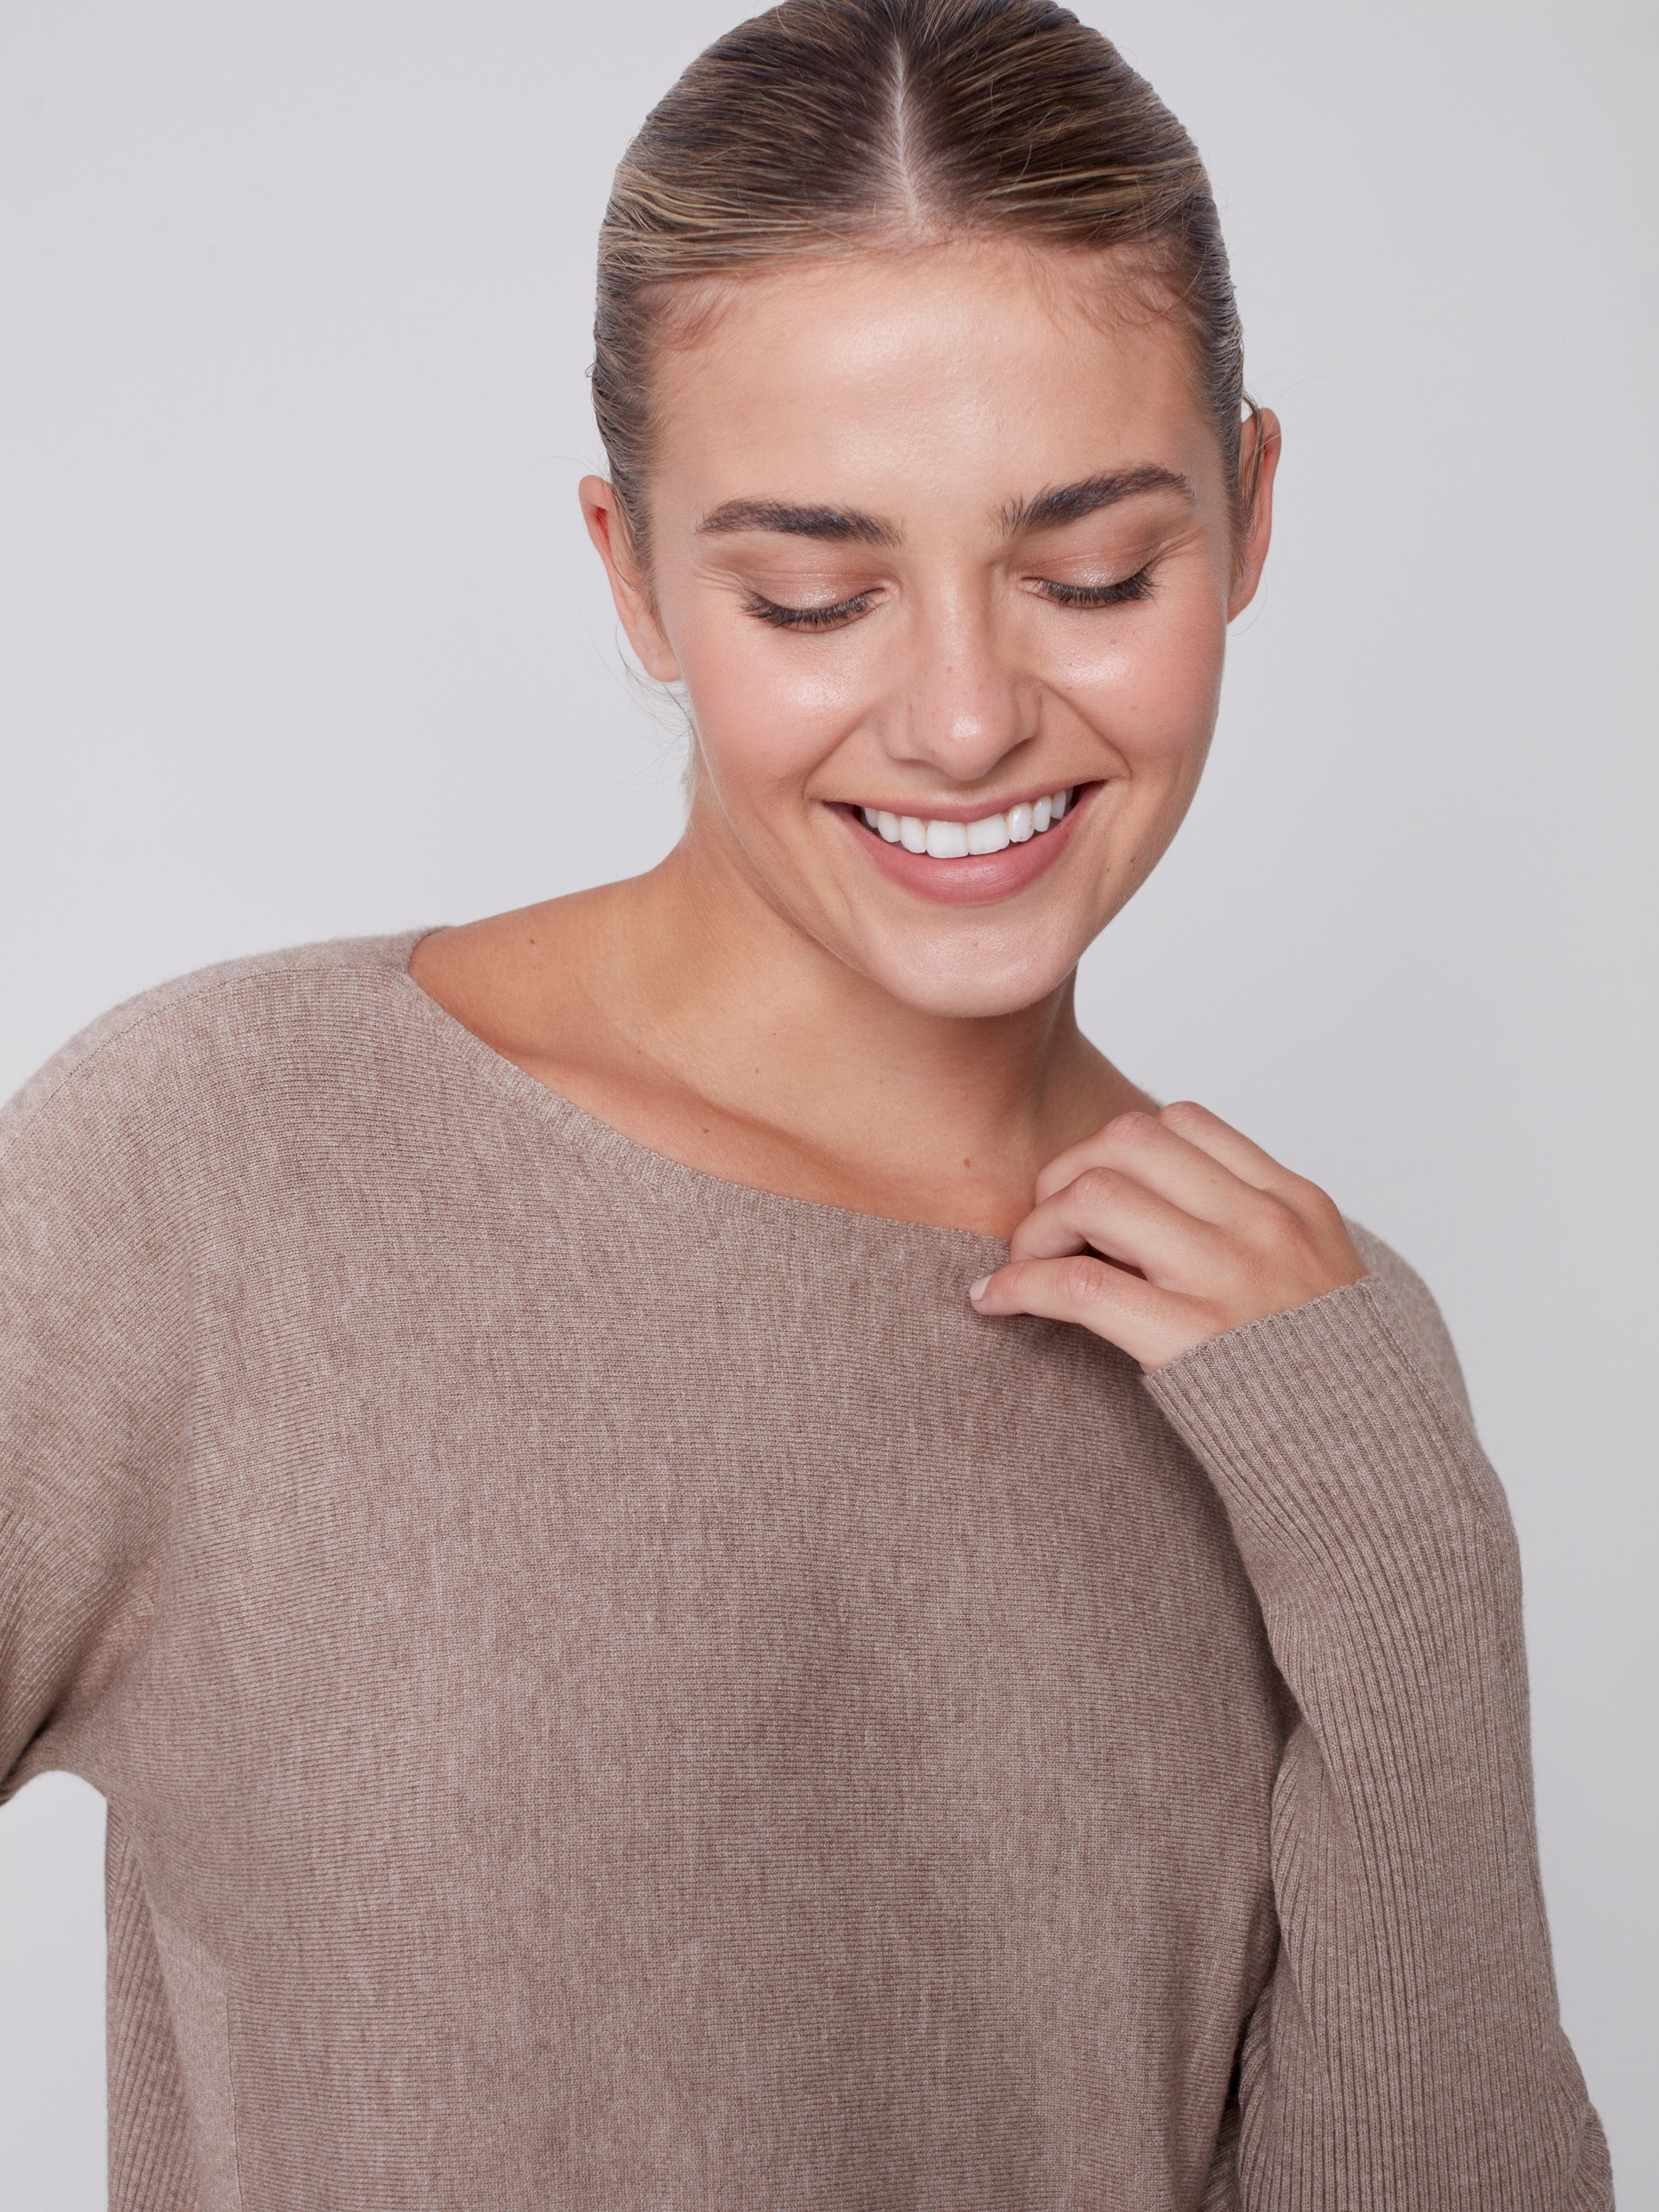 Knit Sweater with Back Lace-up Detail - Truffle